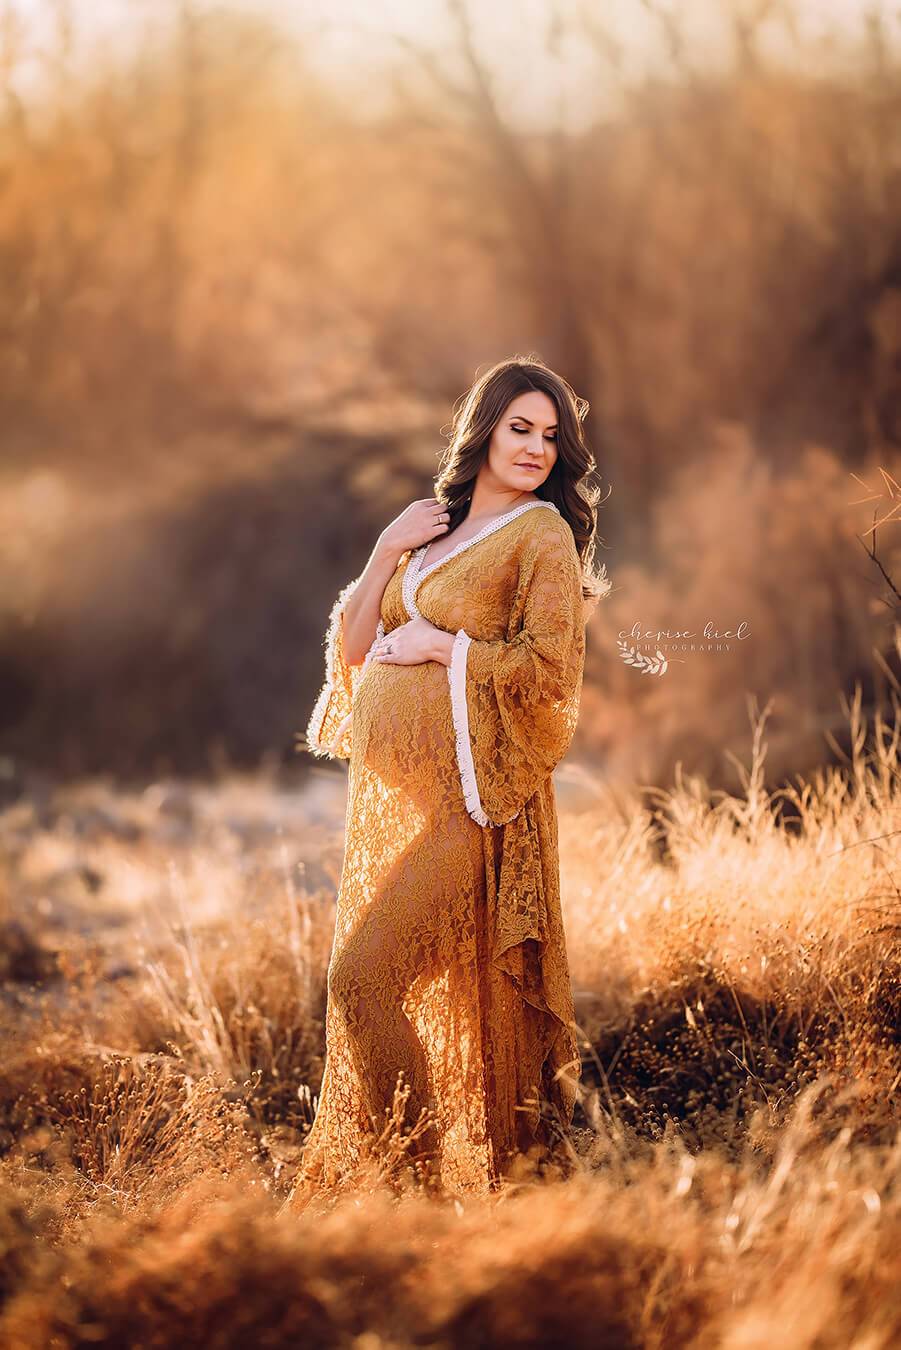 Pregnant model poses outside during a photo shoot. She wears a lace cognac dress, long enough to cover her feet. The dress has a low v cut neckline top and kaftan long sleeves. Her eyes are closed and she is touching her hair with one hand and her bump with the other one. 